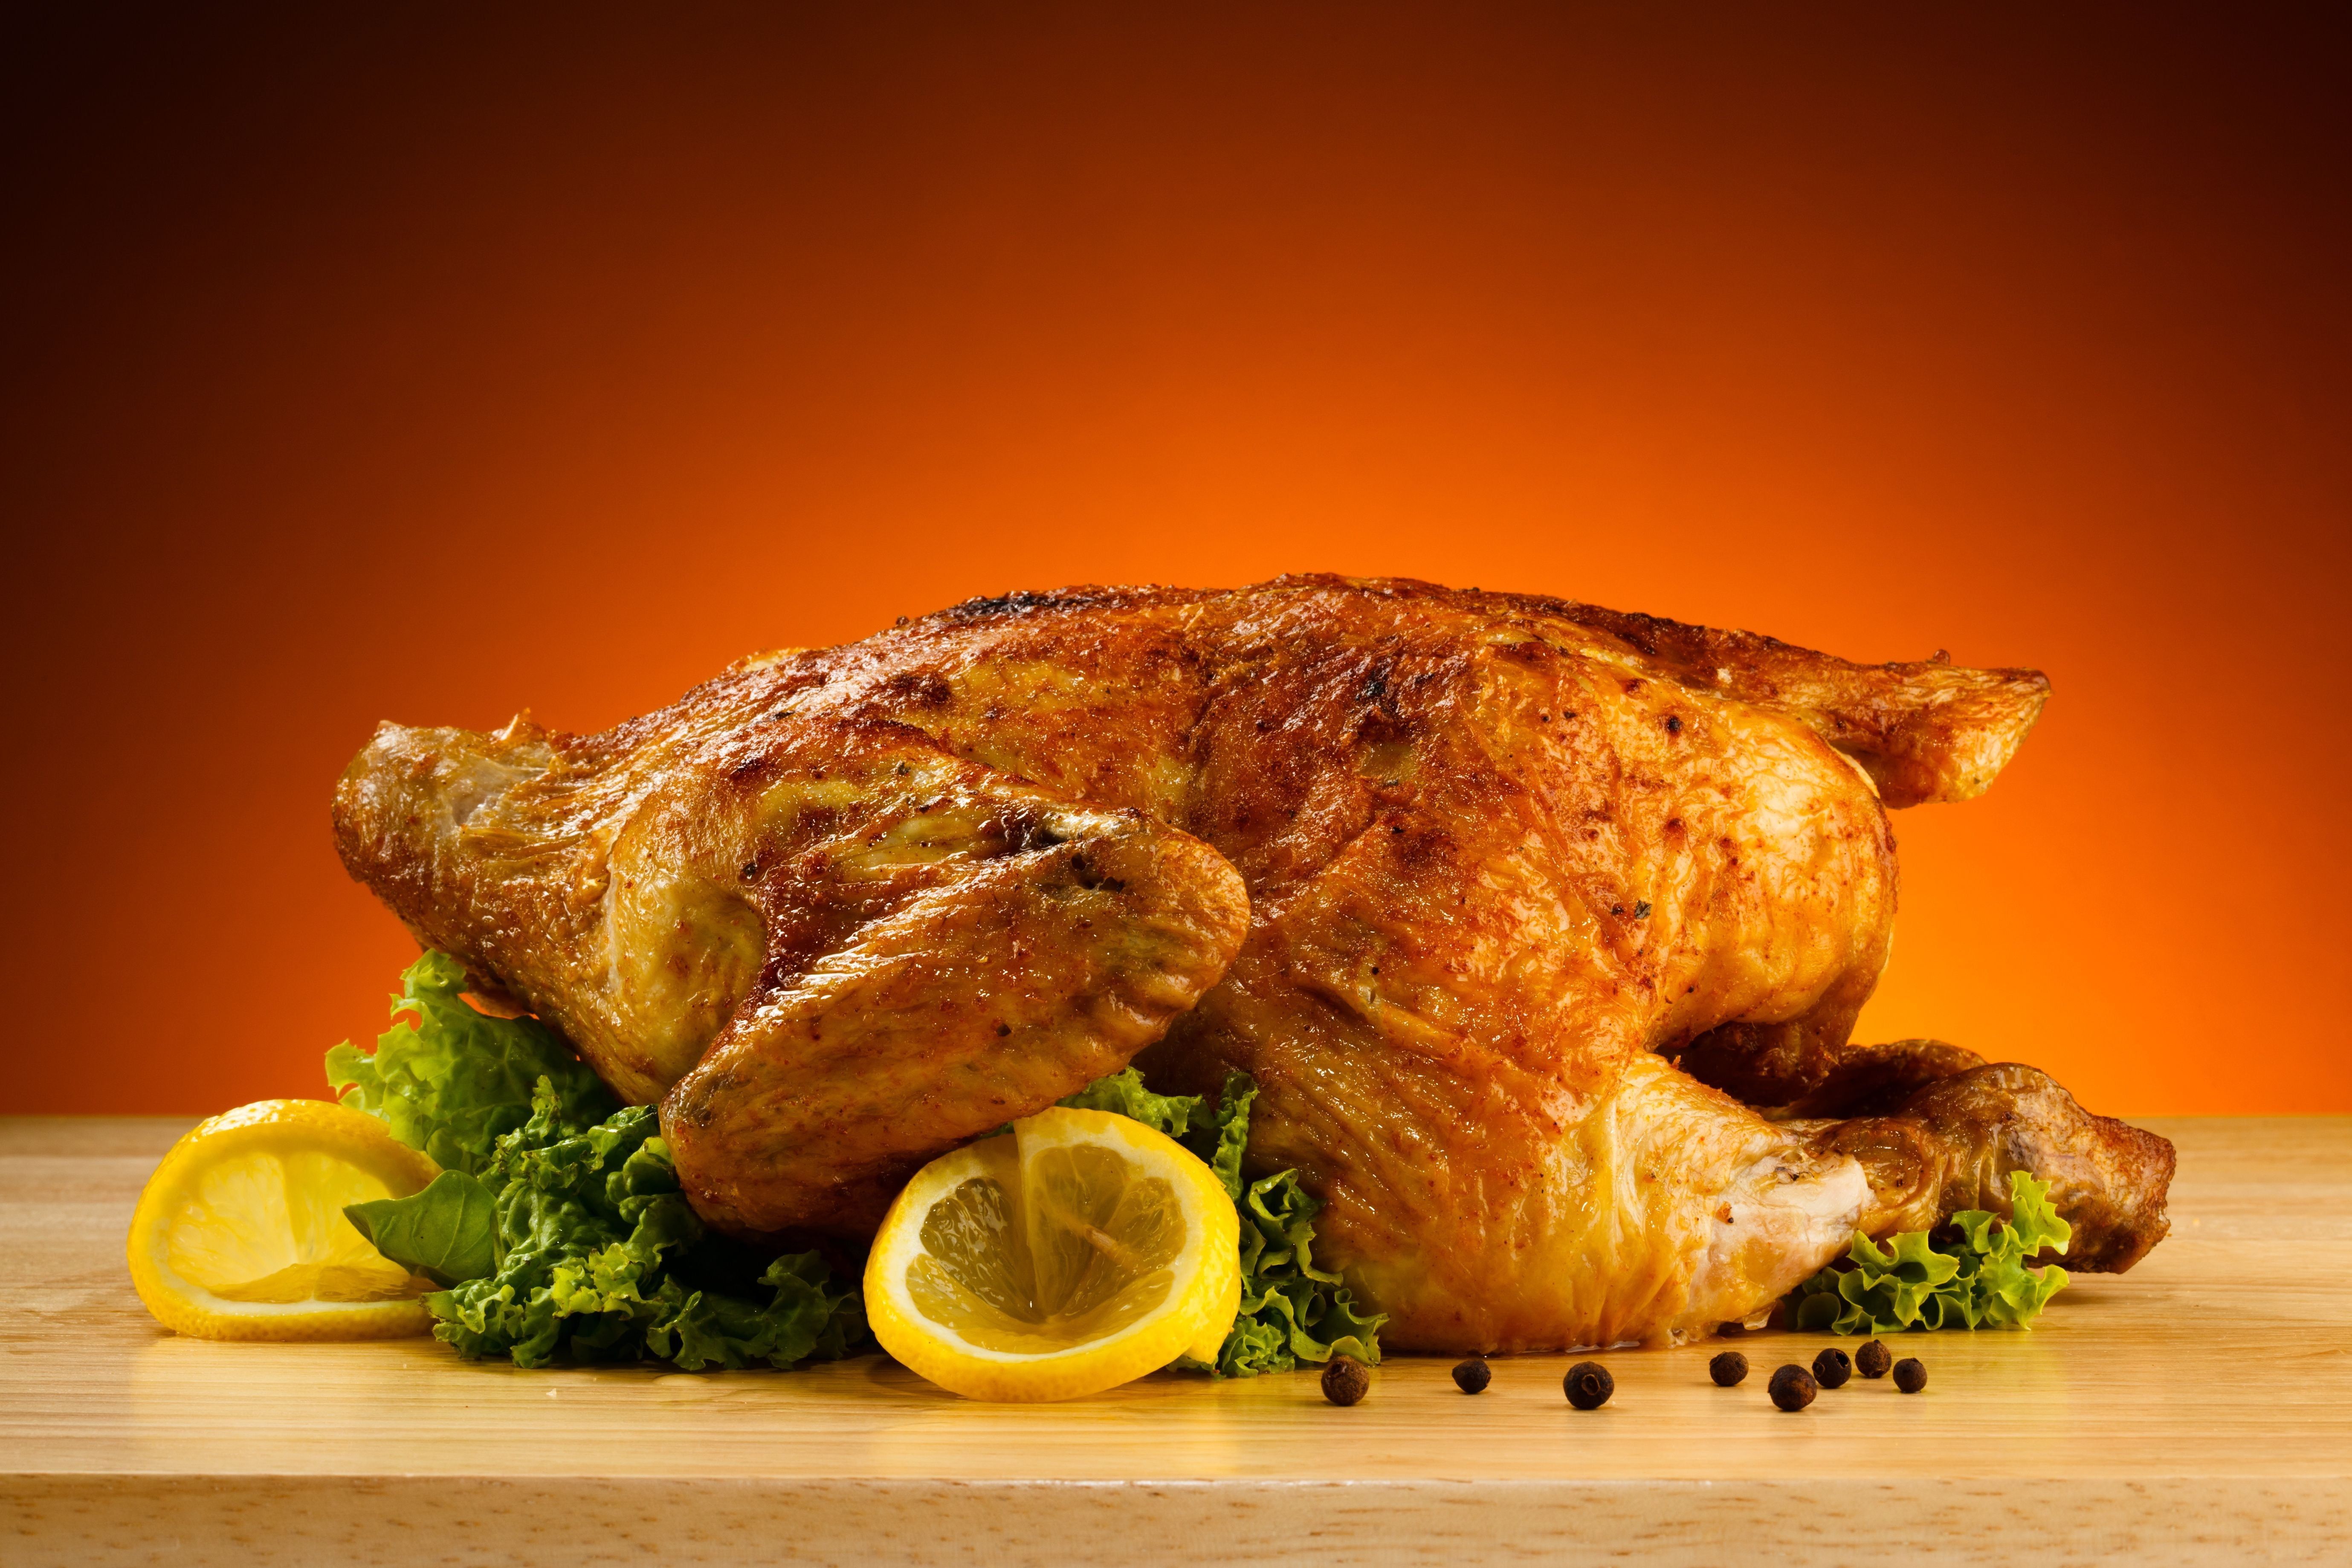 roasted chicken with lemon slices wallpaper #chicken #meat #grill #lemon K #wallpaper #hdwallpaper #deskt. Perfect roast chicken, Roasted chicken, Roast chicken